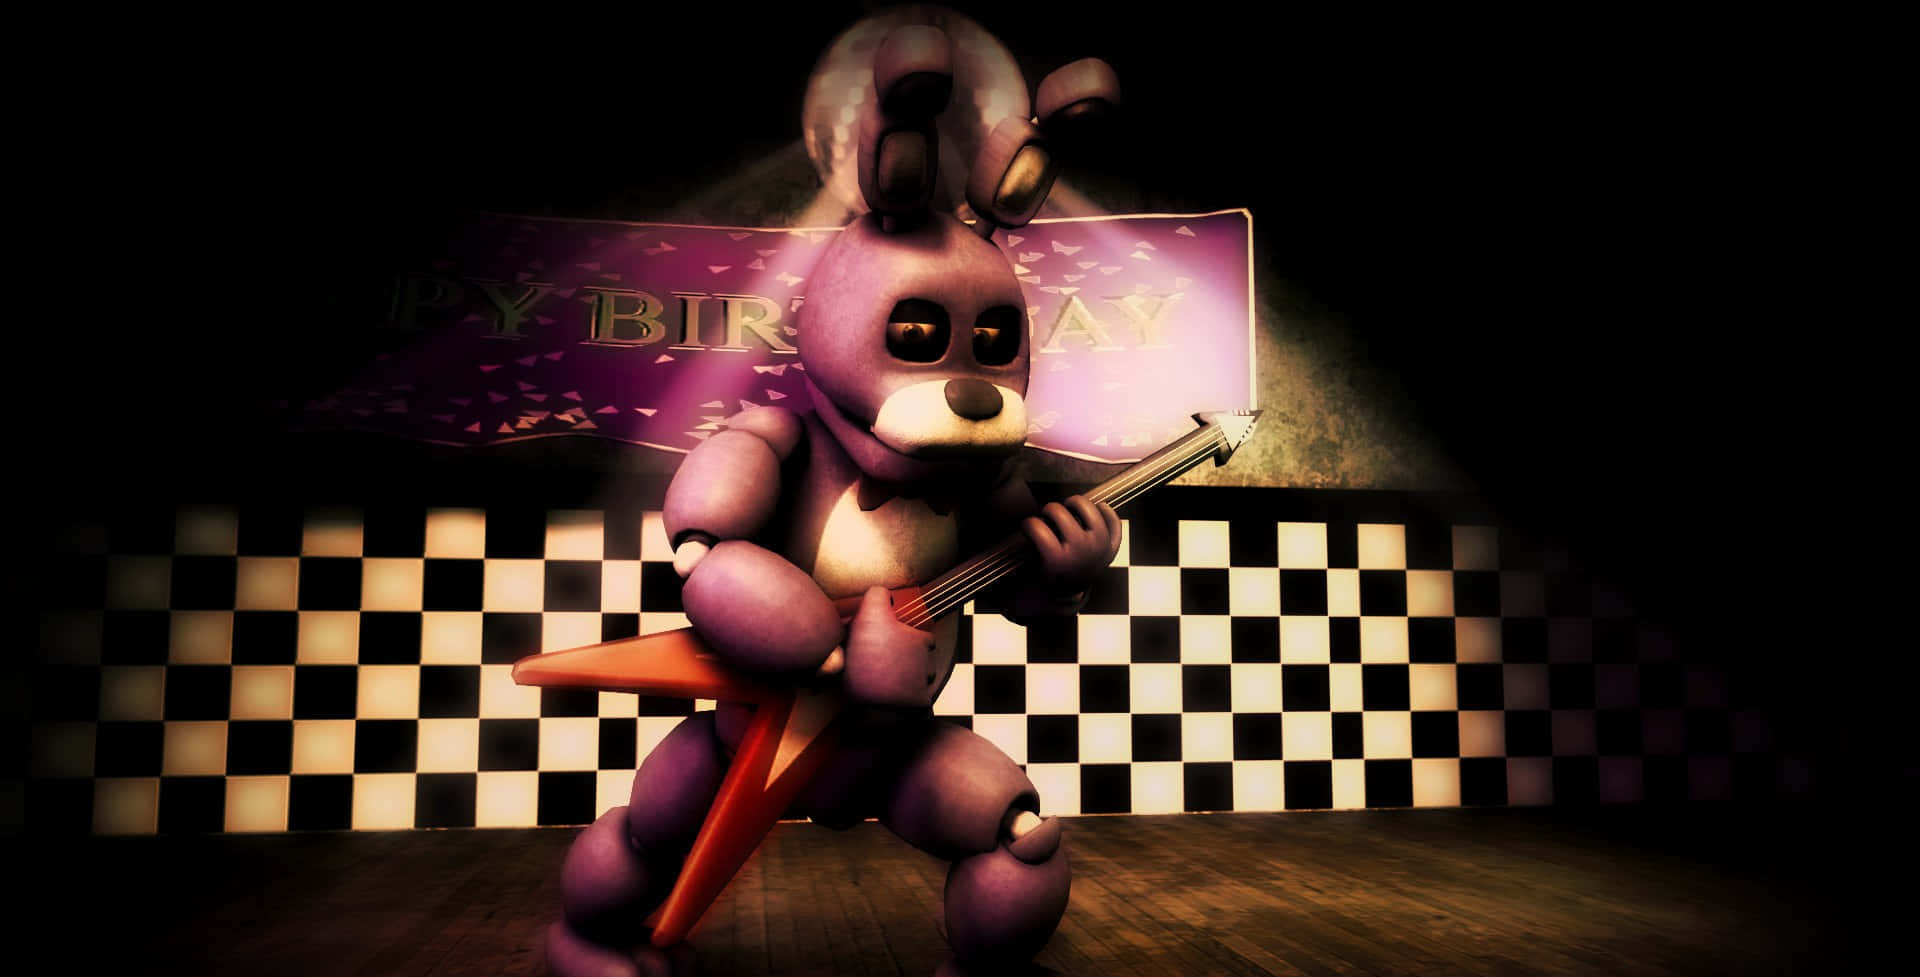 Bonnie The Bunny striking a pose in the spotlight in a mysterious dark room. Wallpaper